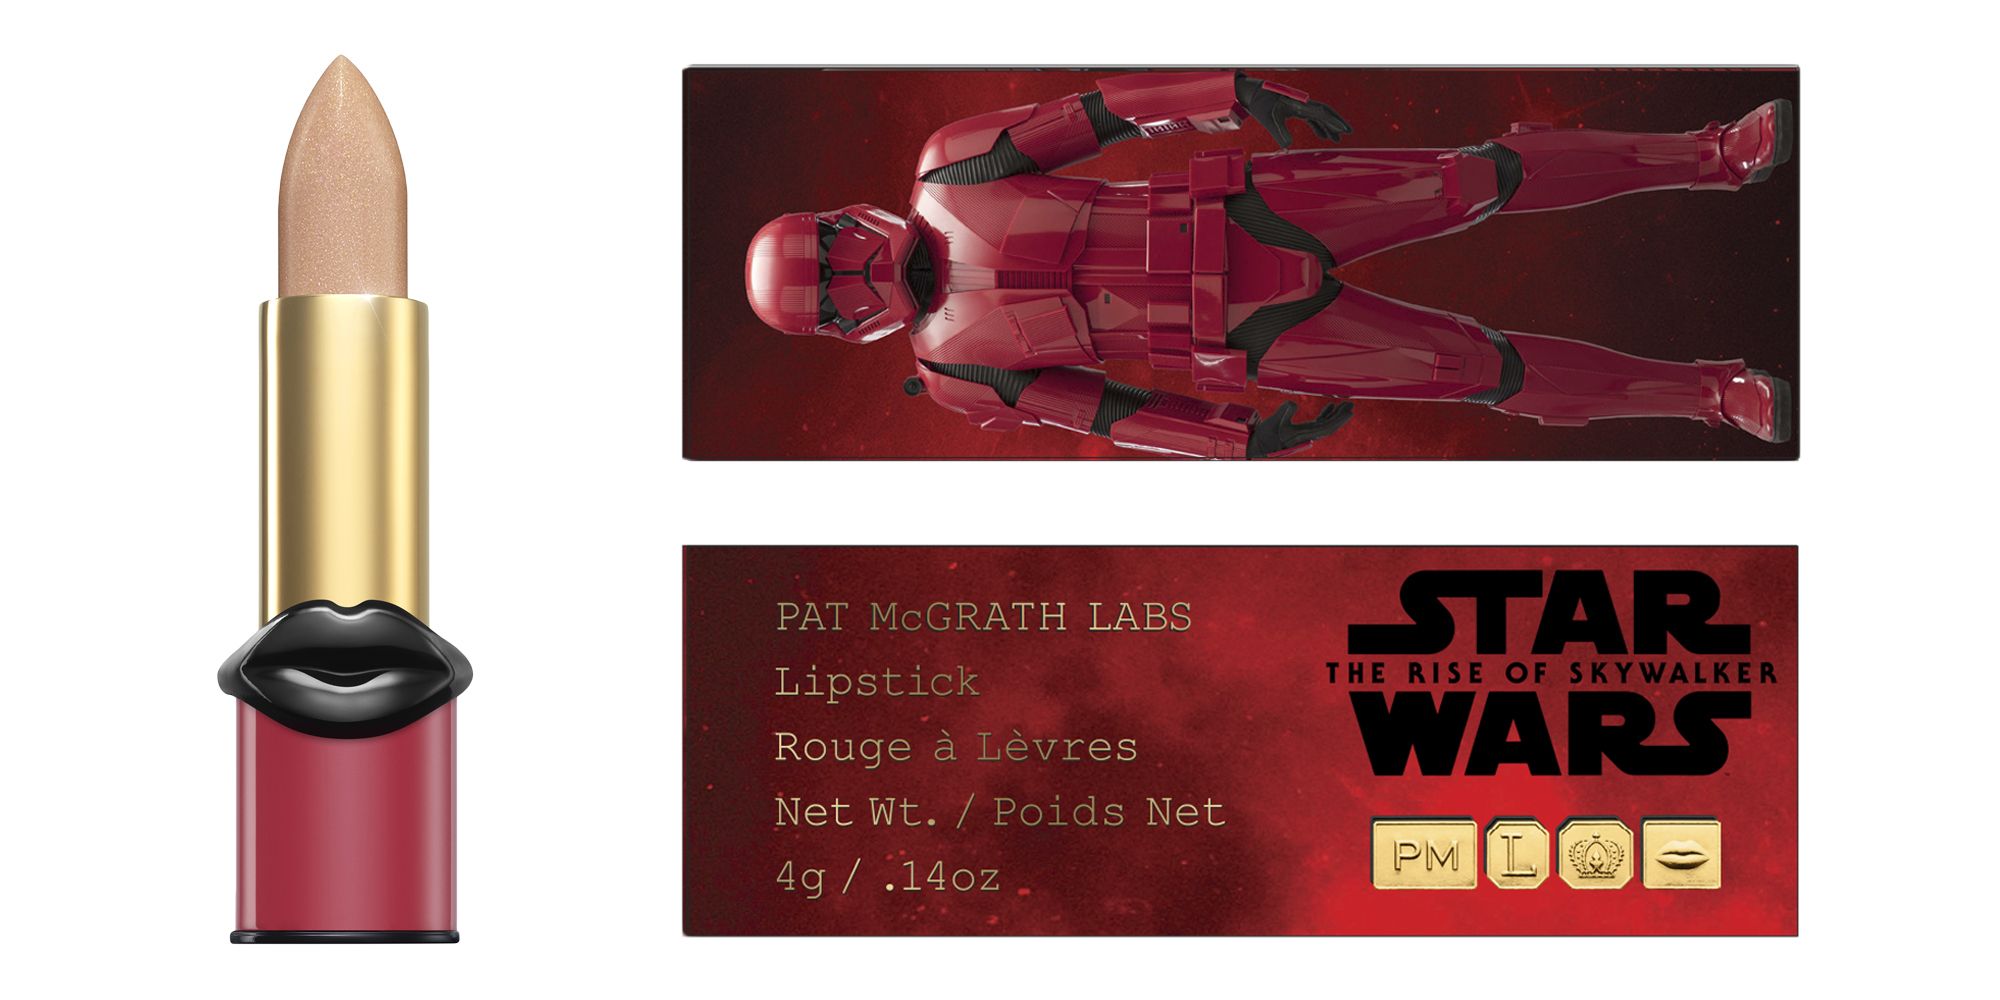 There's a Pat McGrath Star Wars lip balm about to land [upated] -  DisneyRollerGirl